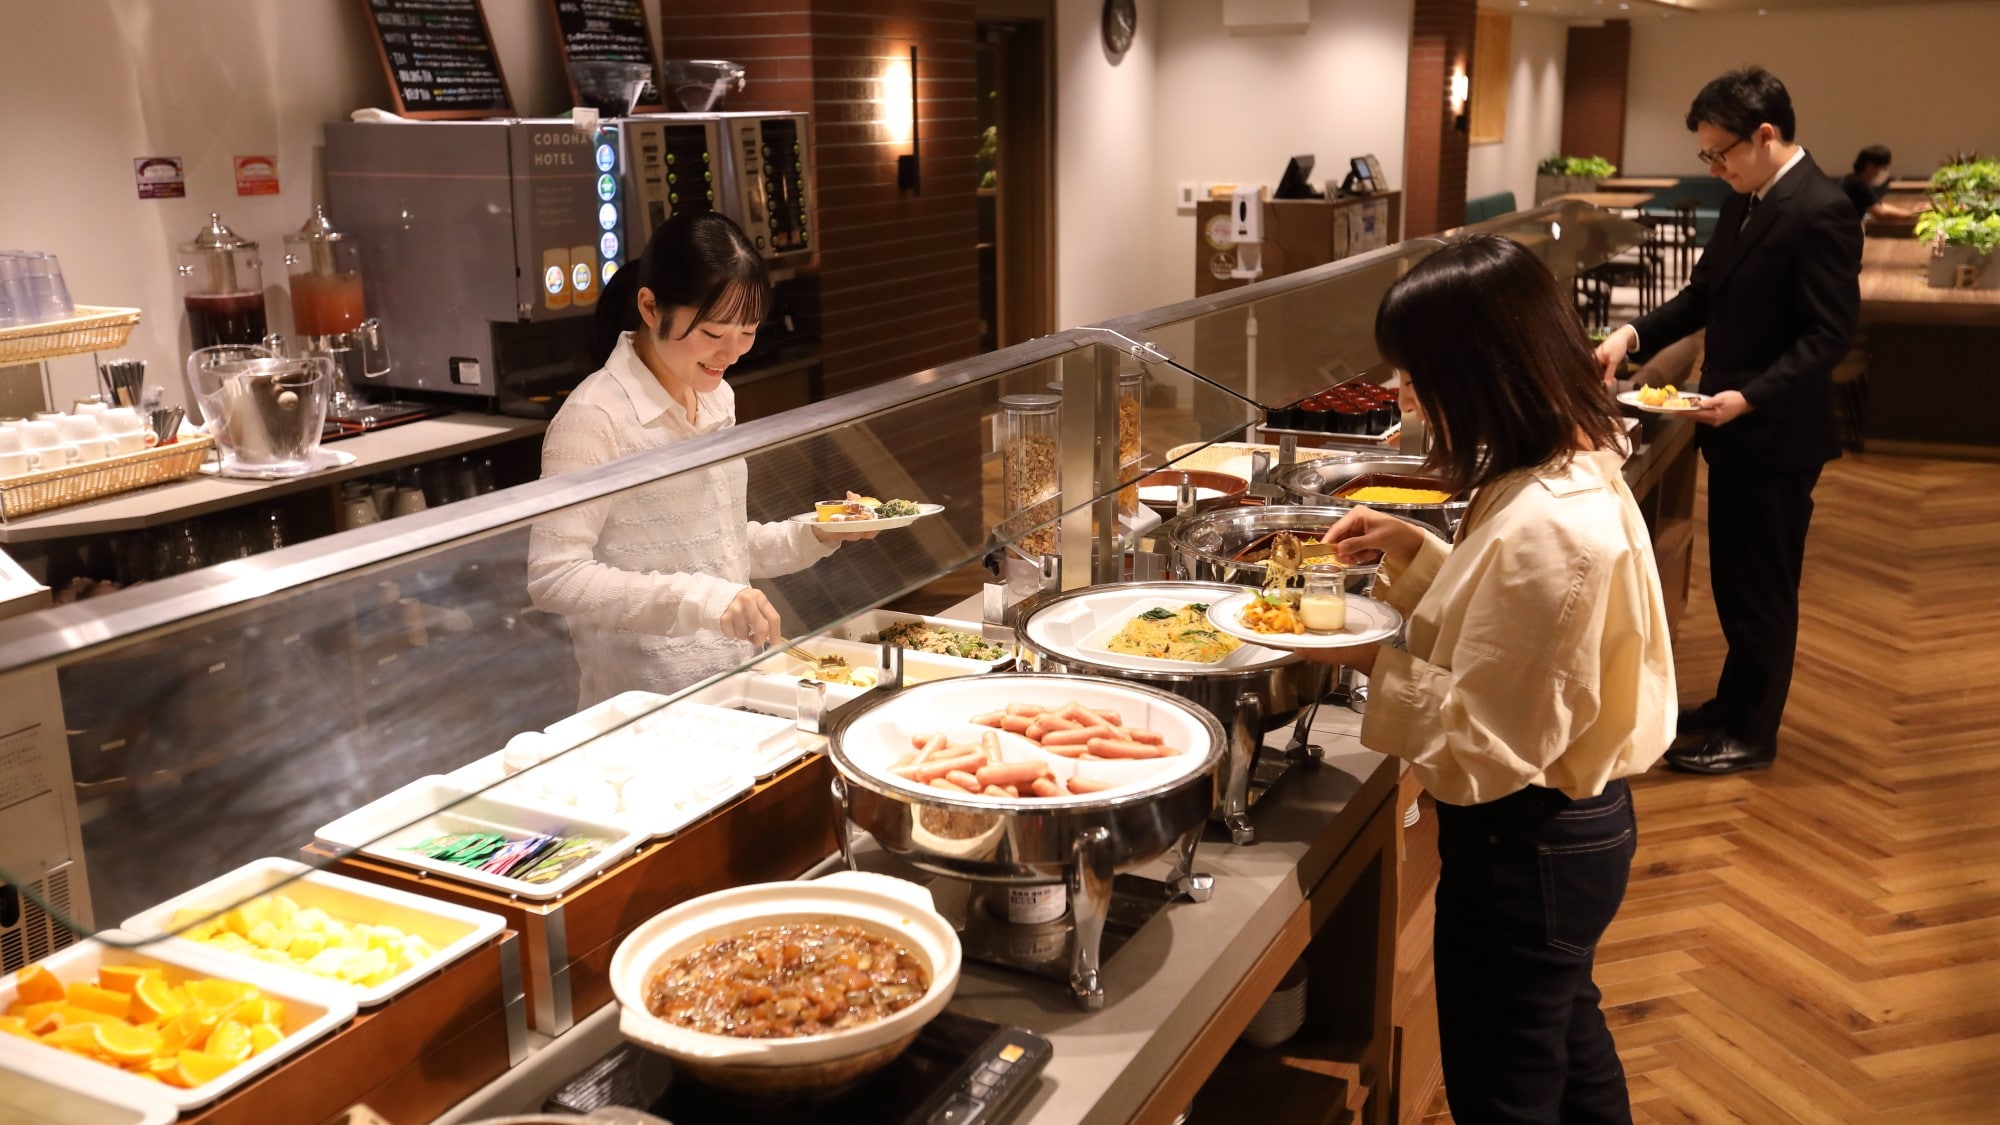 Our proud breakfast buffet! There are many original dishes that can only be eaten at this hotel, as well as flavors that can only be found in Kansai.